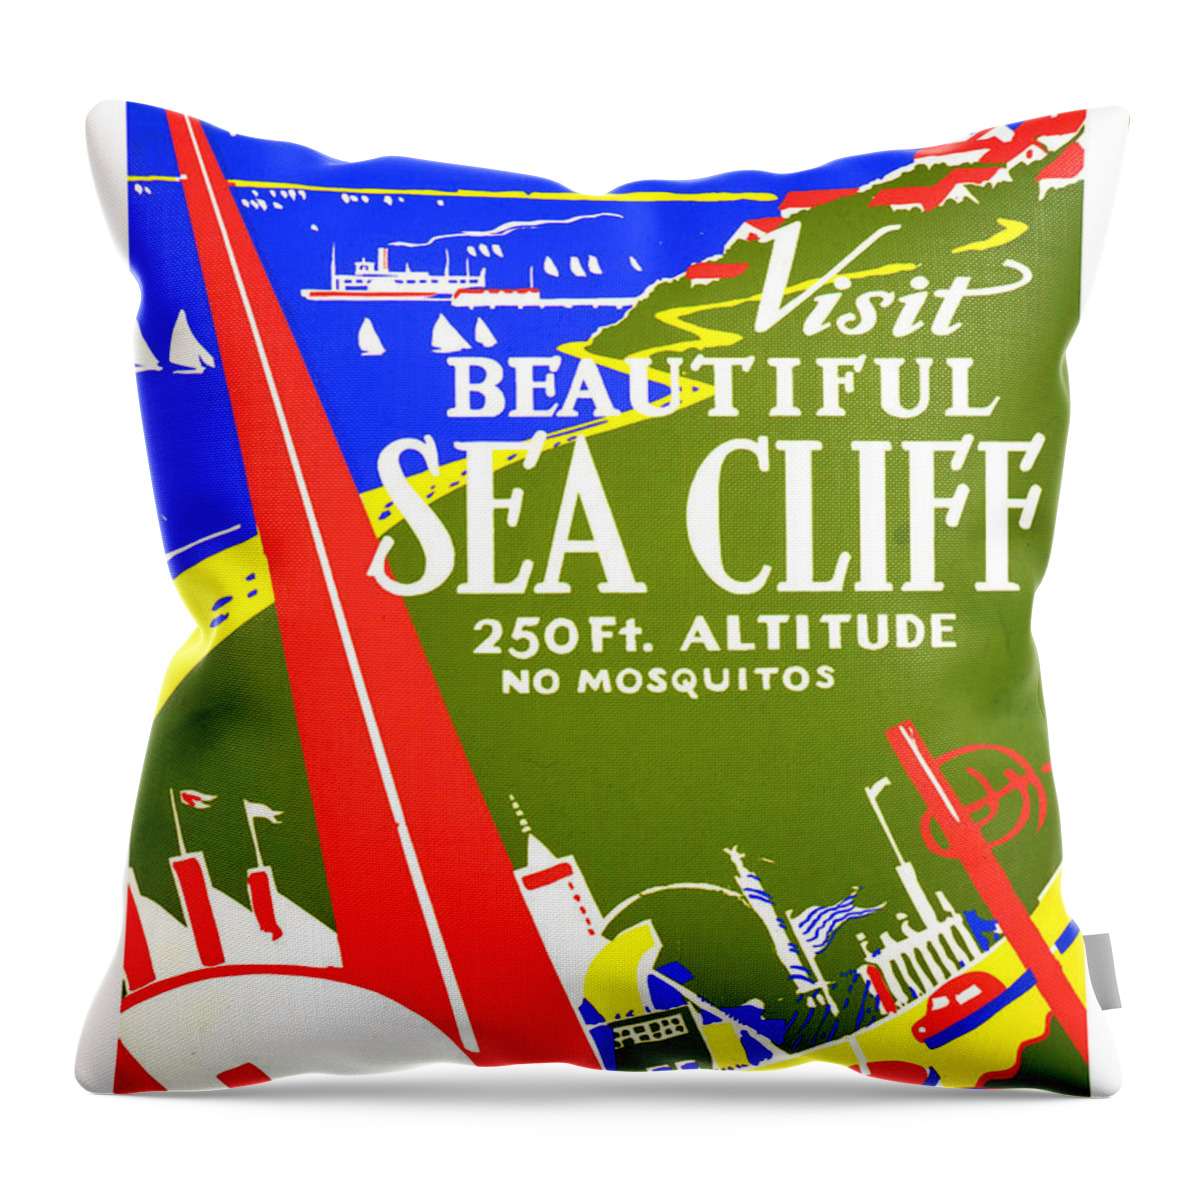 Worlds Fair Throw Pillow featuring the painting While in worlds fair, visit Sea Cliff by Long Shot